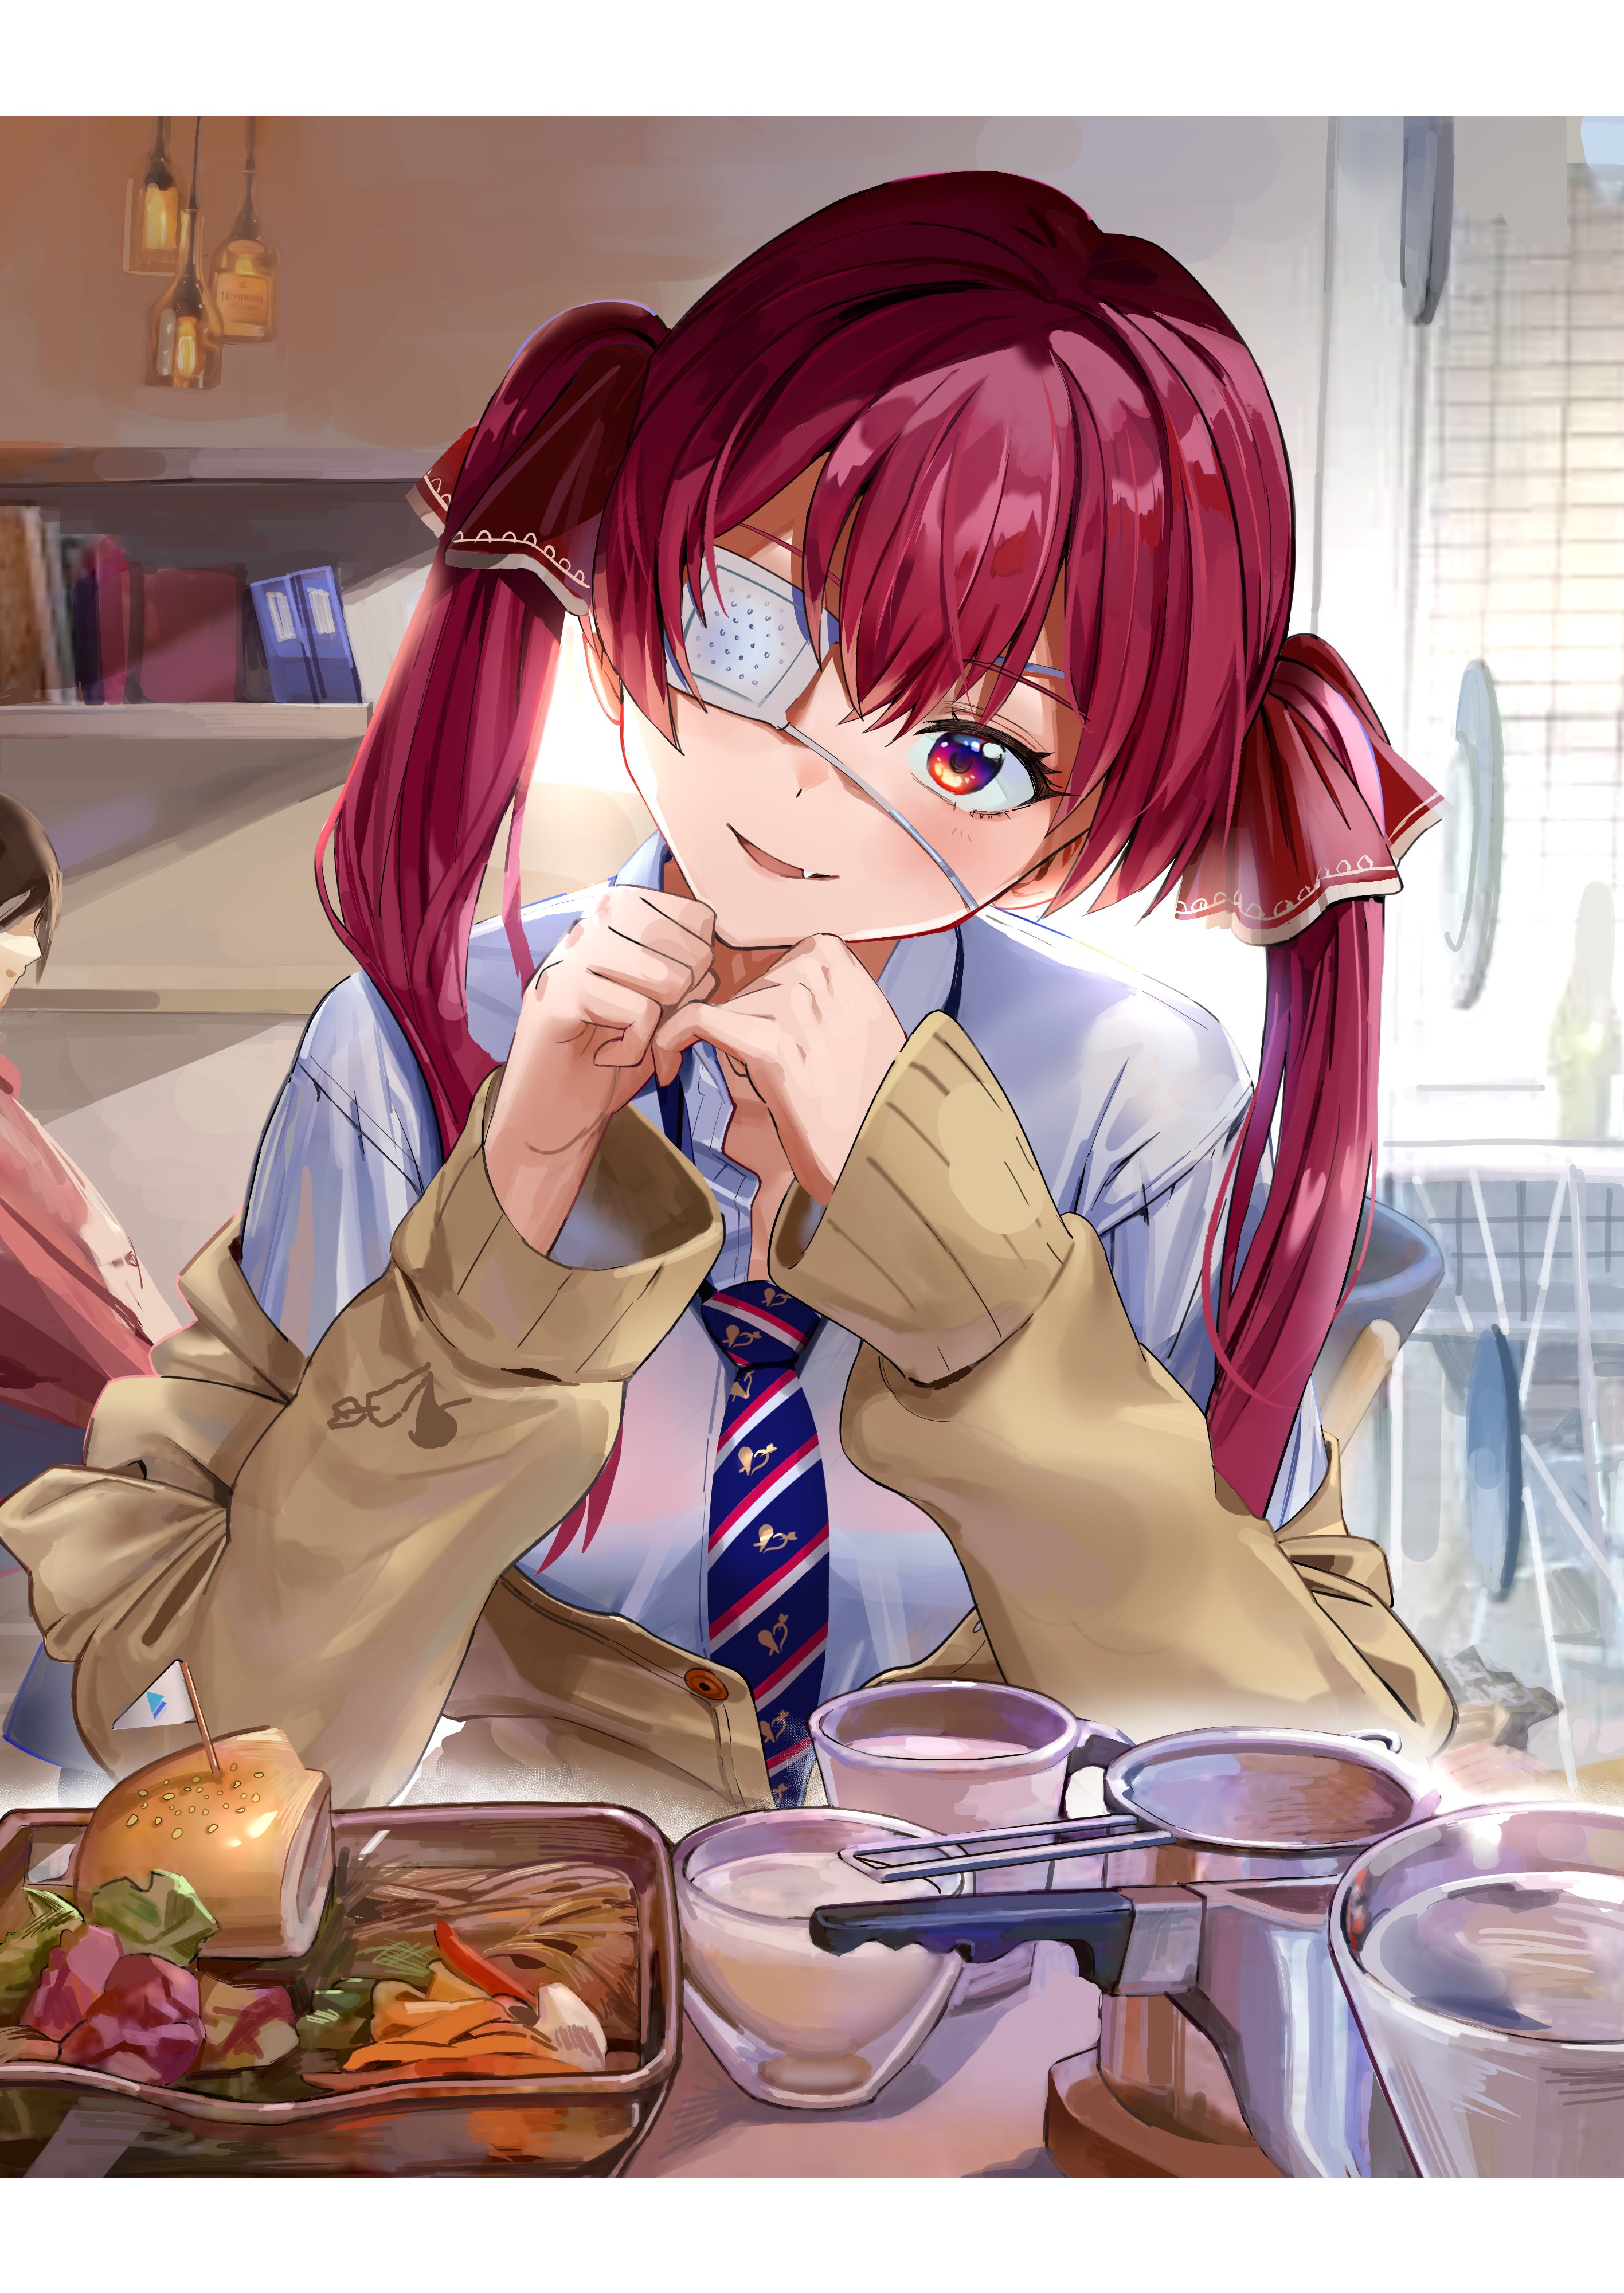 Anime 2833x4000 anime anime girls Hololive Houshou Marine eyepatches twintails Virtual Youtuber Misom150 redhead food portrait display red eyes looking at viewer